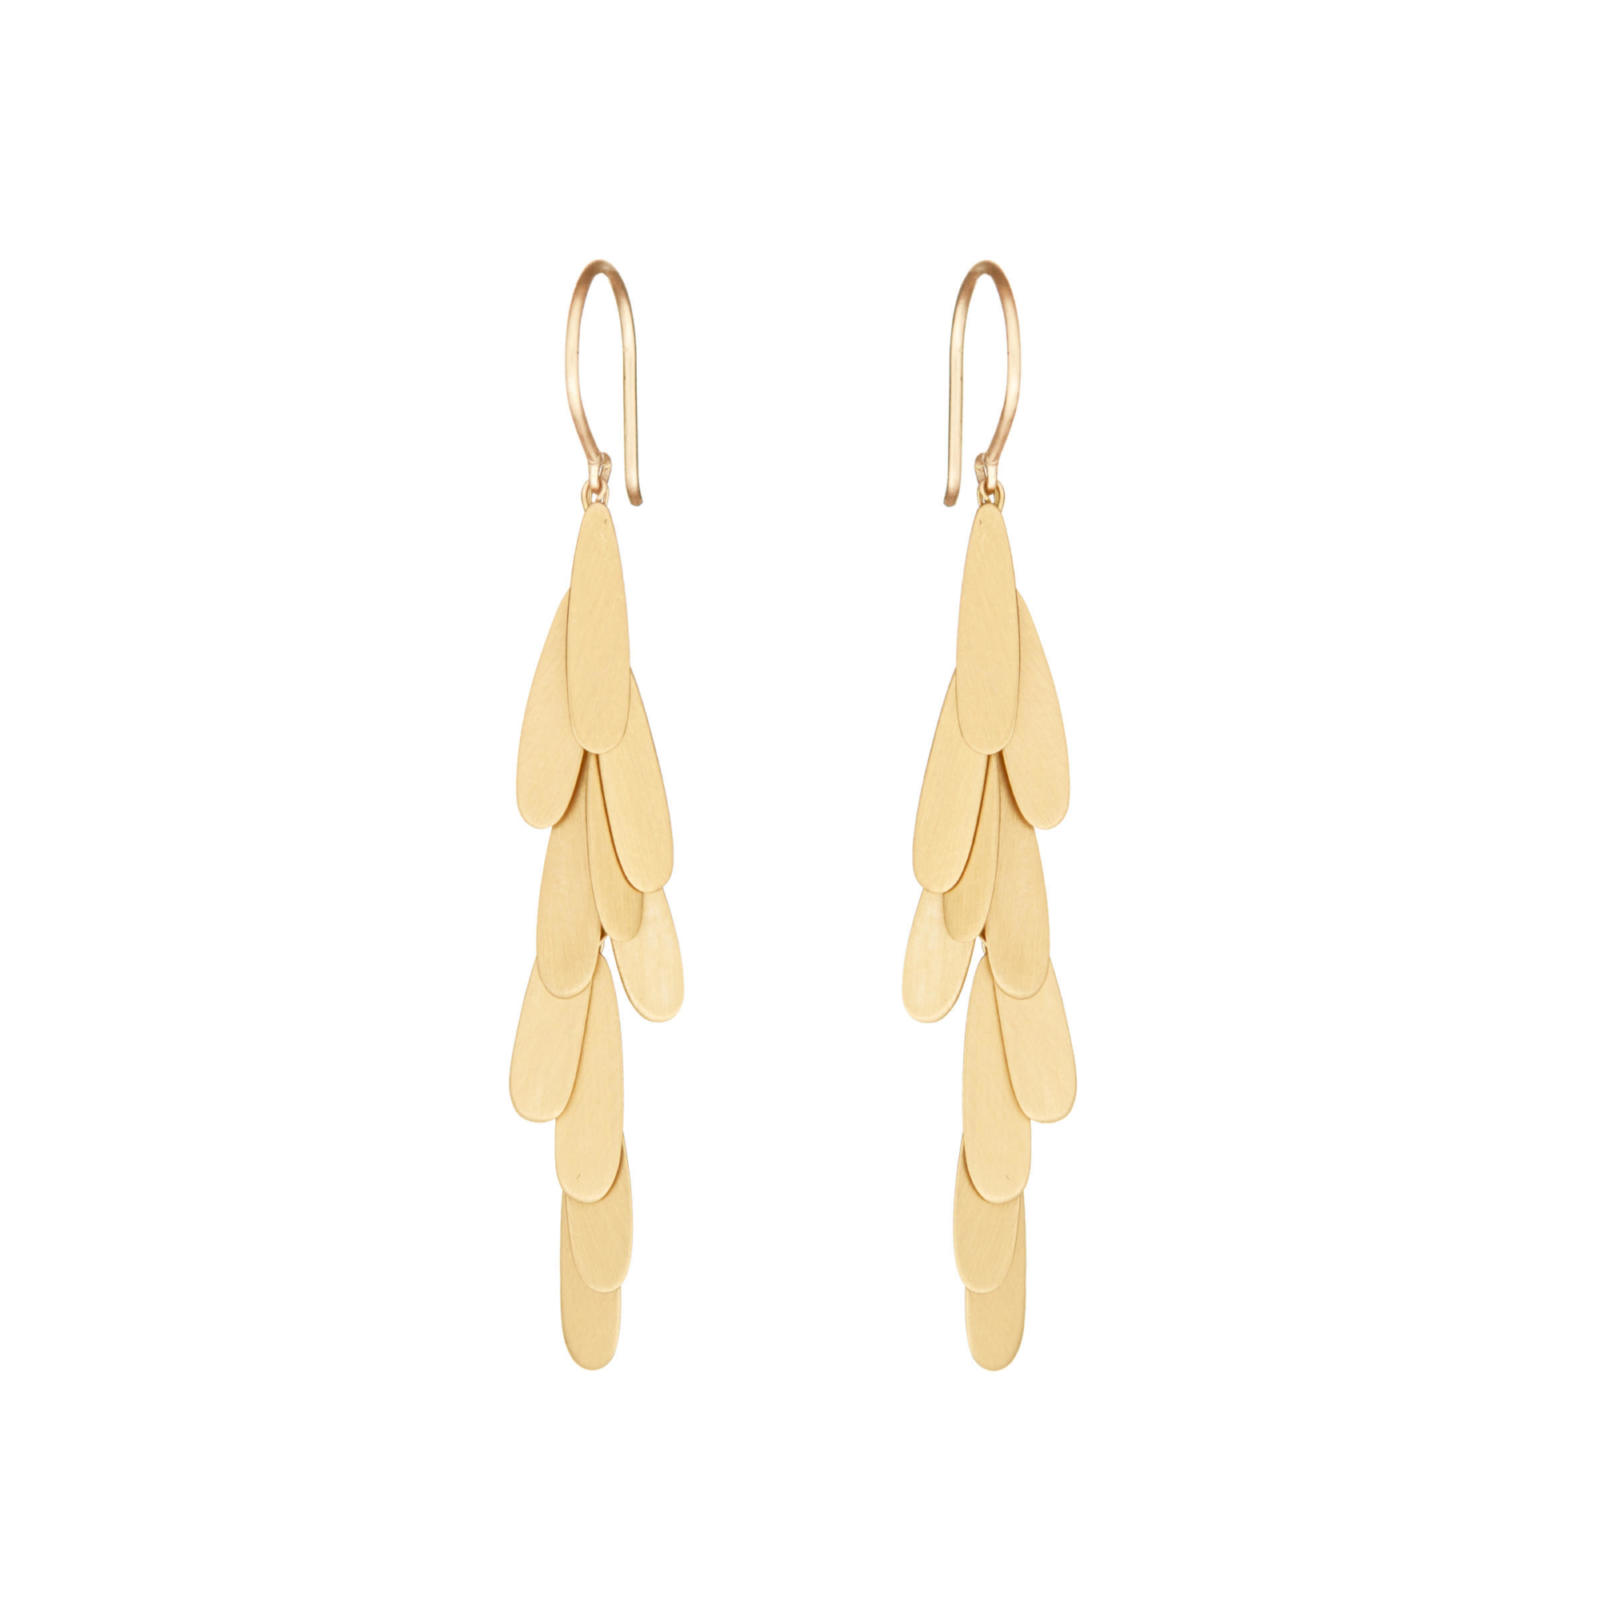 Sia Taylor ME14 Y Yellow Gold Earrings WB